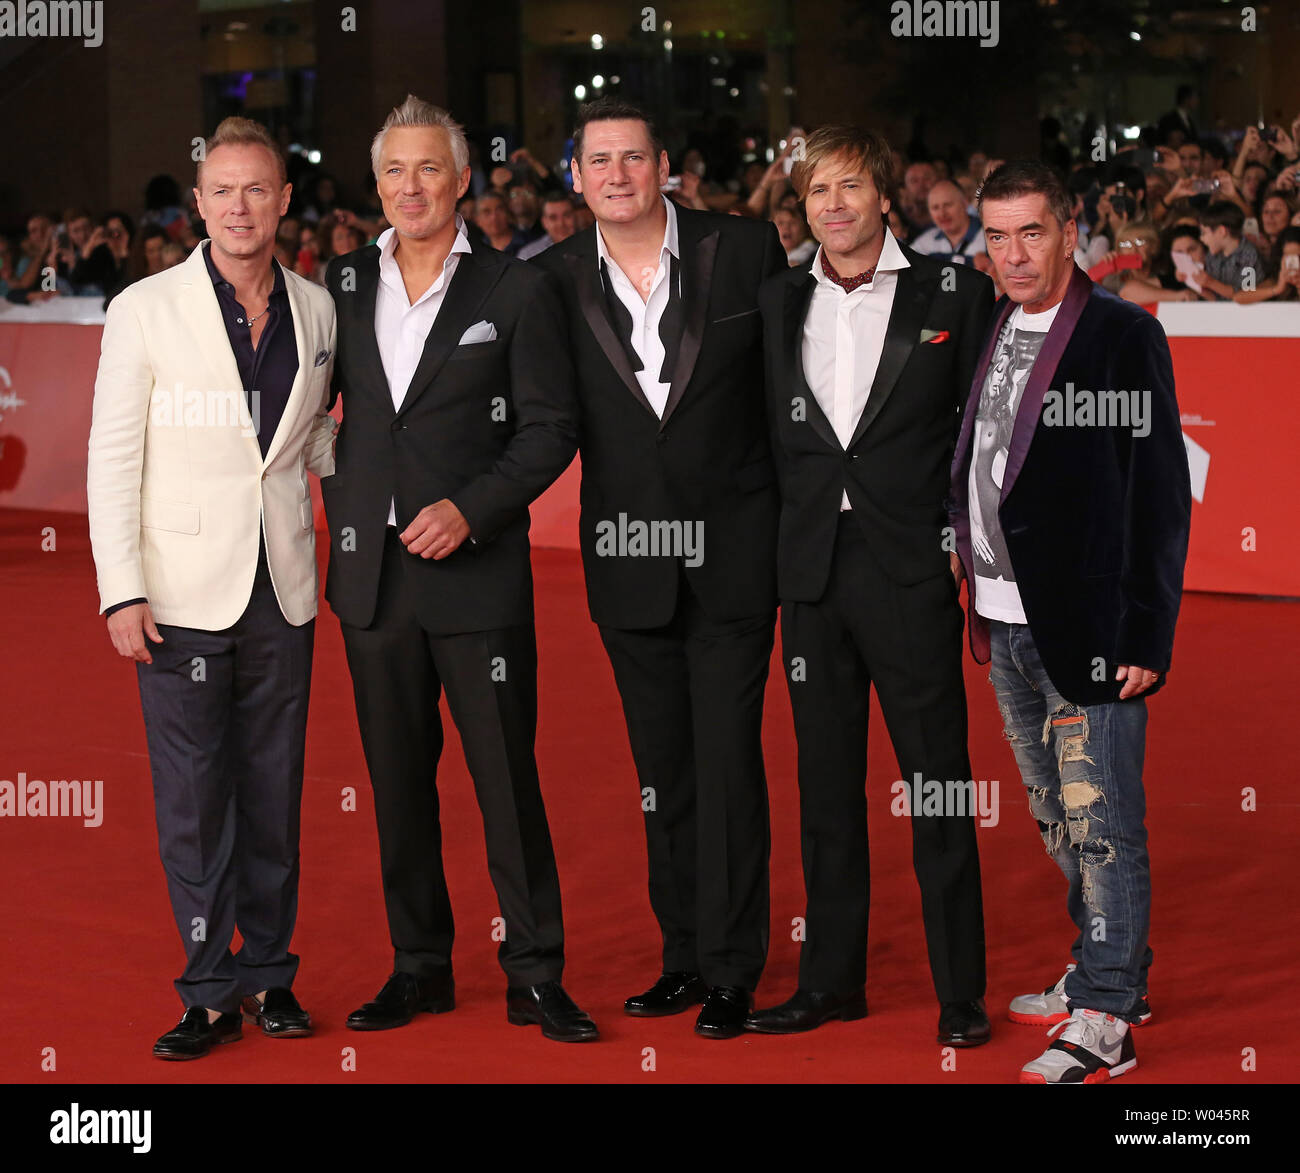 (From L to R) Gary Kemp, Martin Kemp, Steve Norman, Tony Hadley and John Keeble of Spandau Ballet arrive on the red carpet before the screening of the film 'Soul Boys of the Western World' at the 9th annual Rome International Film Festival in Rome on October 20, 2014.   UPI/David Silpa Stock Photo